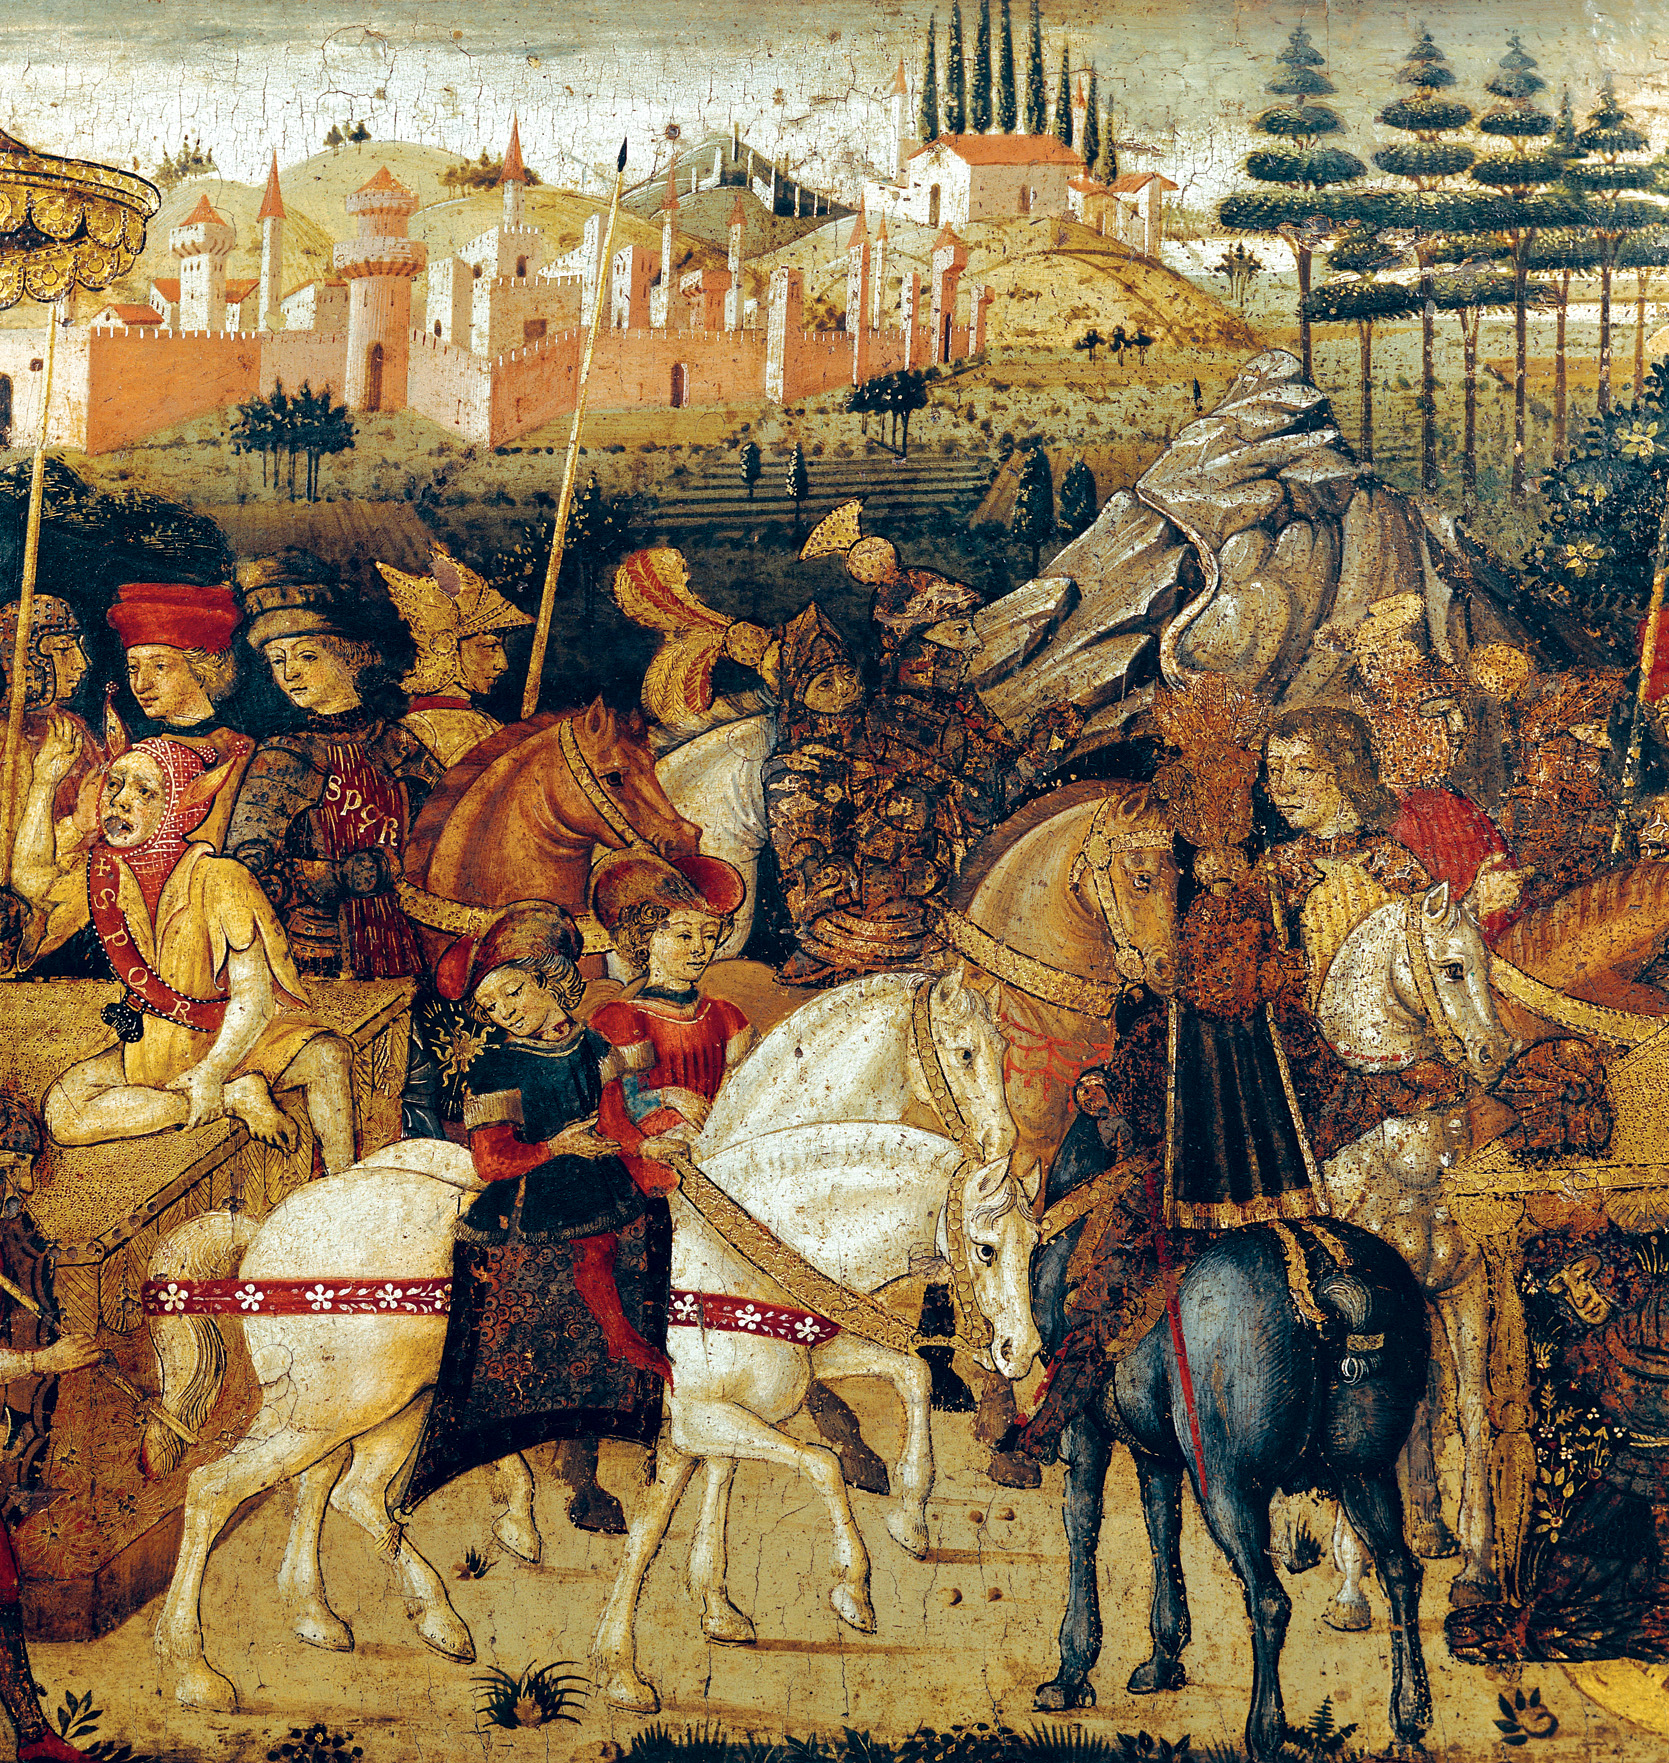 A 15th-century painting depicts Caesar’s triumph. Caesar was determined that Pompey’s army must be annihilated, so he attacked the Republican encampment to ensure his adversary’s destruction.